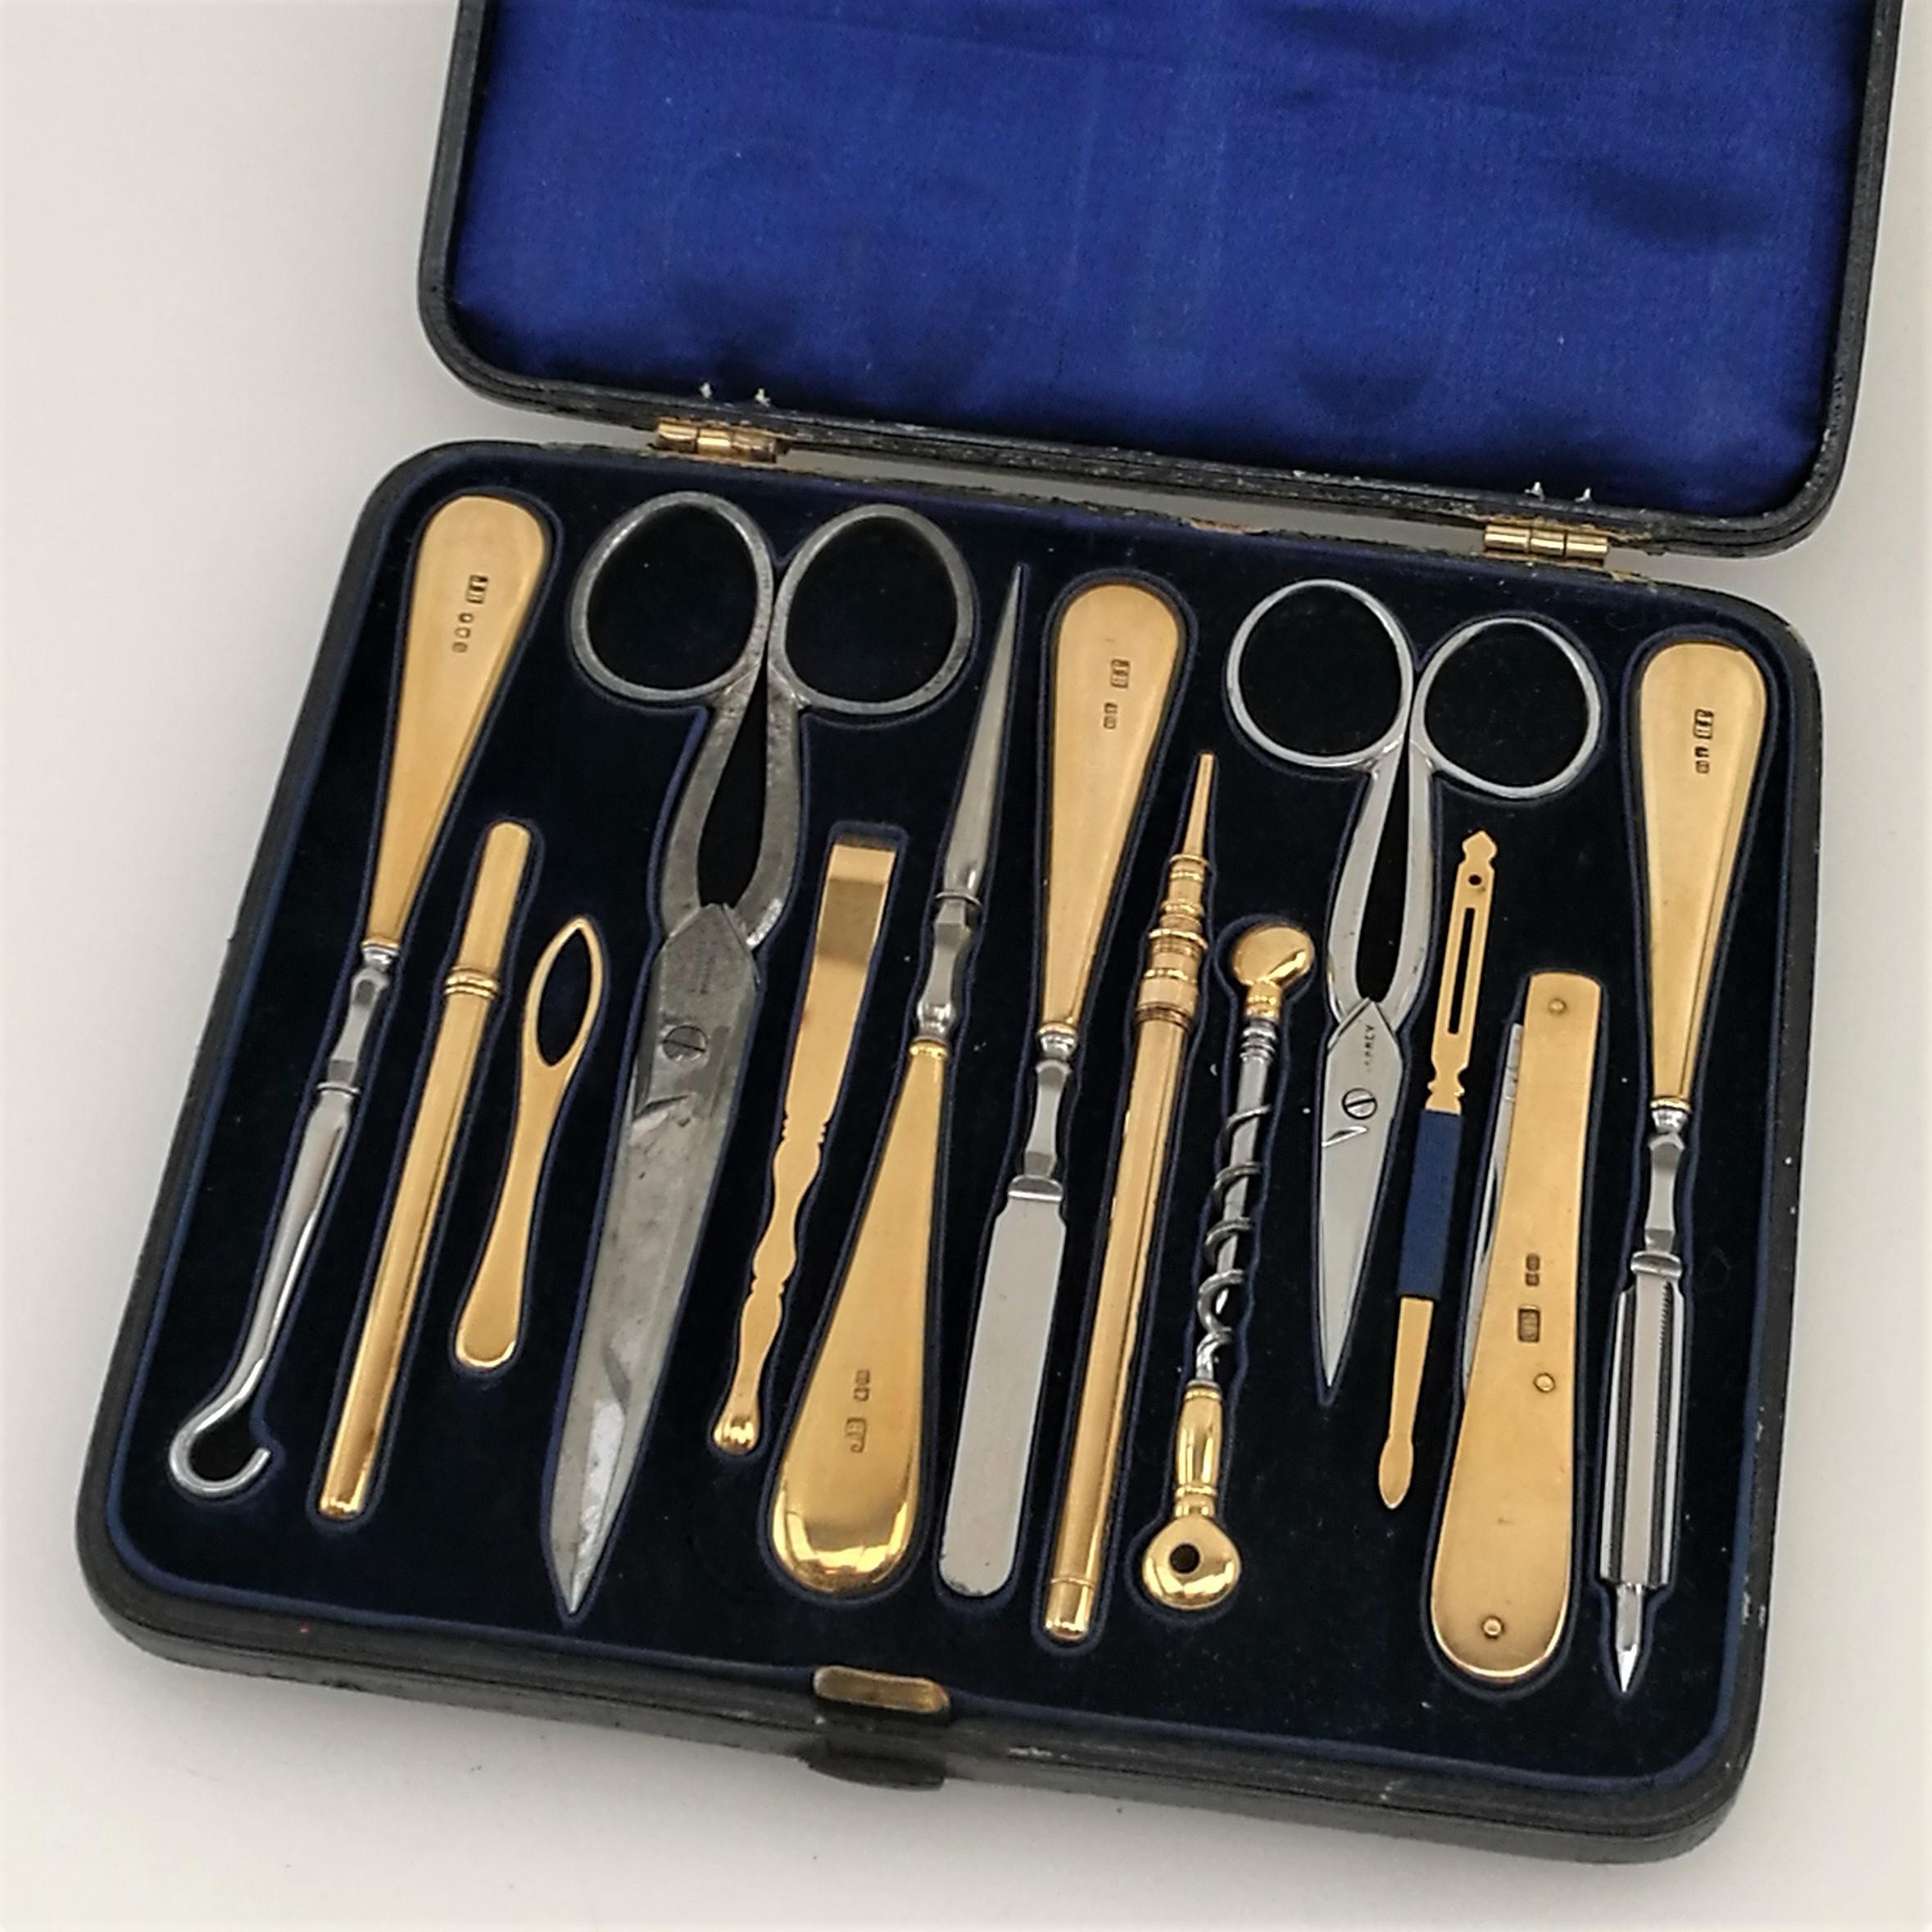 A gorgeous antique Victorian 18-carat gold sewing & grooming kit in a lovely leather covered fitted case. The case contains 13 separate items and includes two pairs of steel scissors. The rest of the items have 18-carat gold Handles and include a